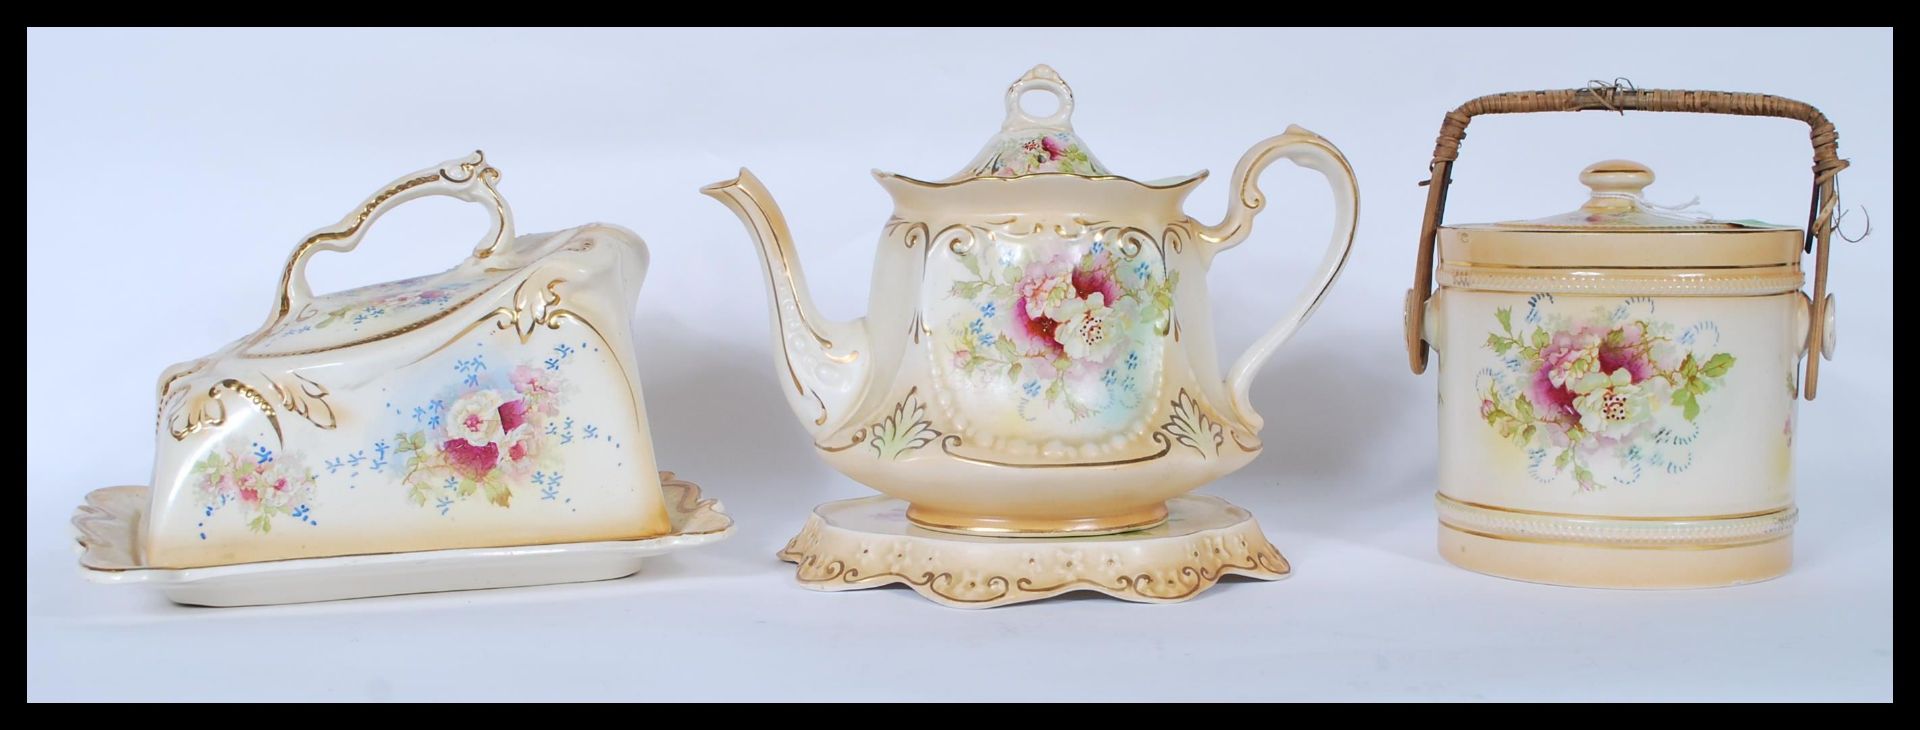 A late 19th / early 20th Century teapot on stand by Wm Adams and Co Crown Semi-Porcelain having